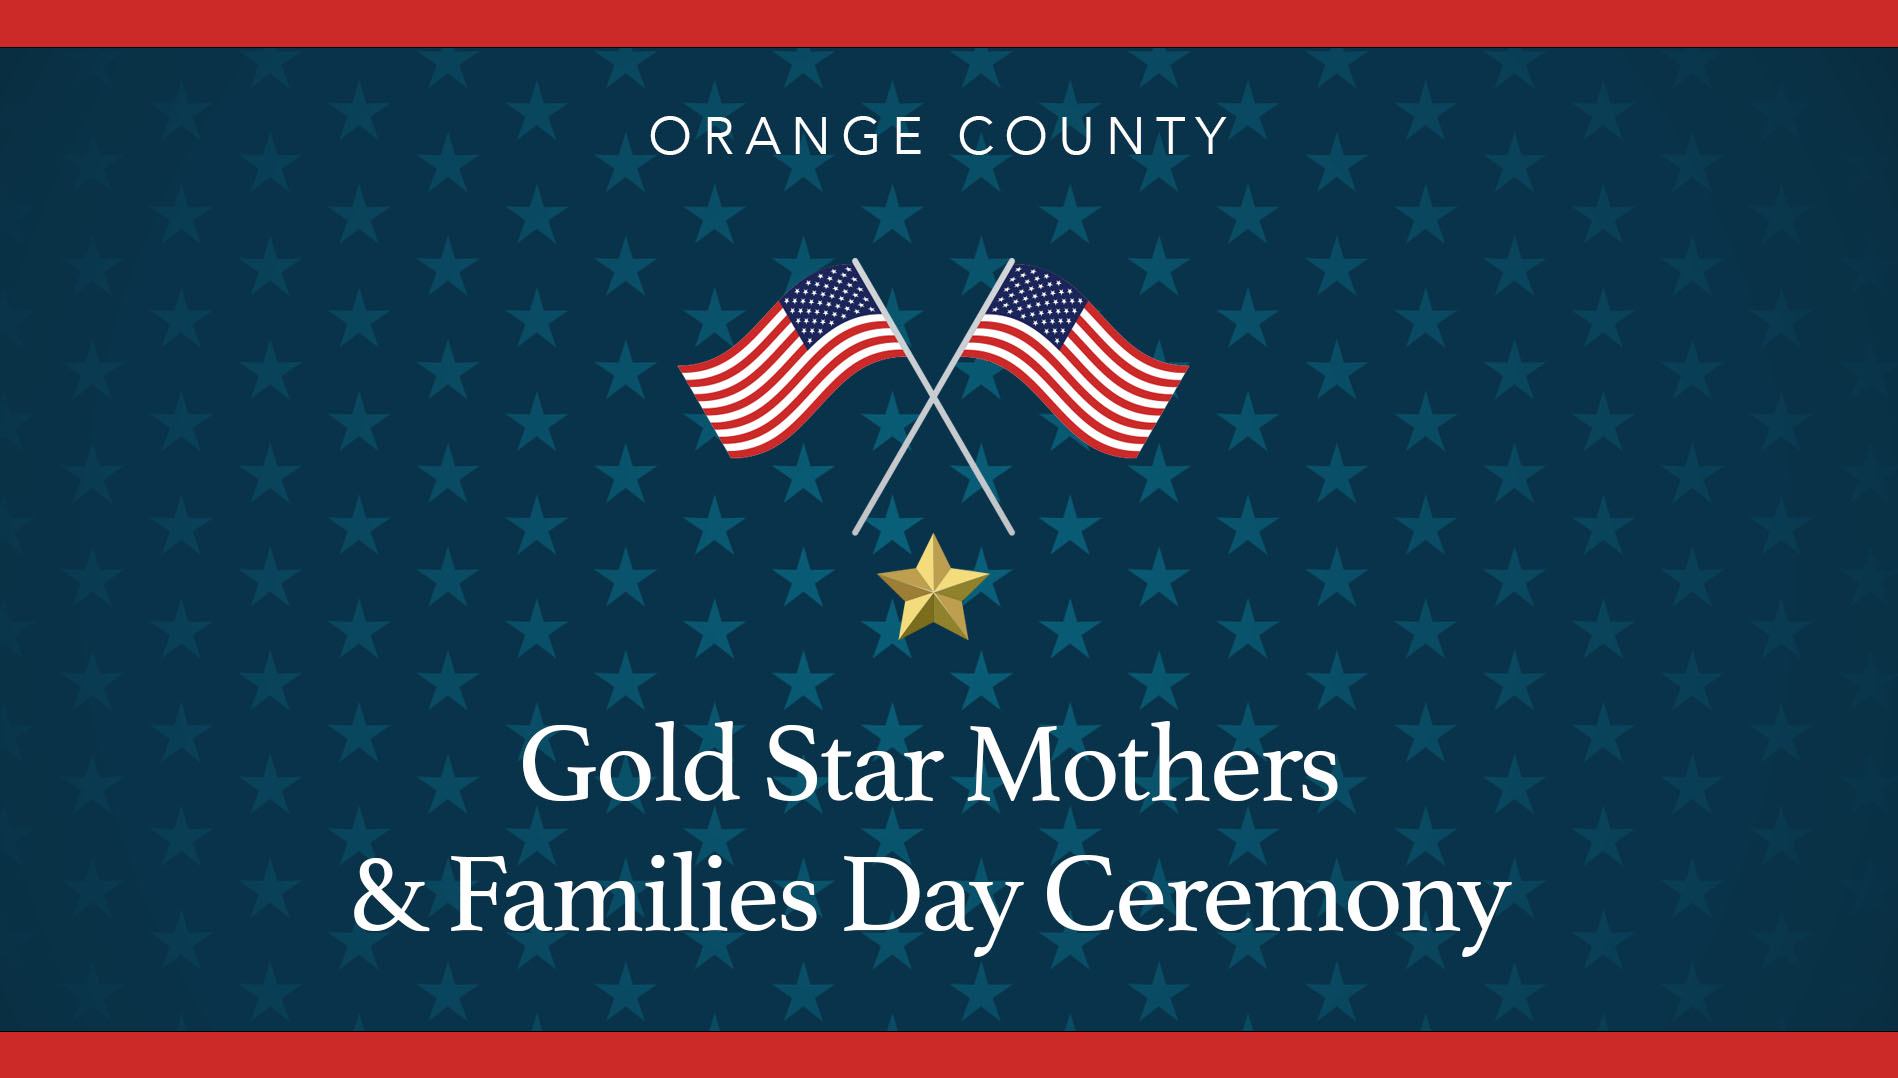 Orange County Gold Star Mothers and Families Day Ceremony - RSVP now